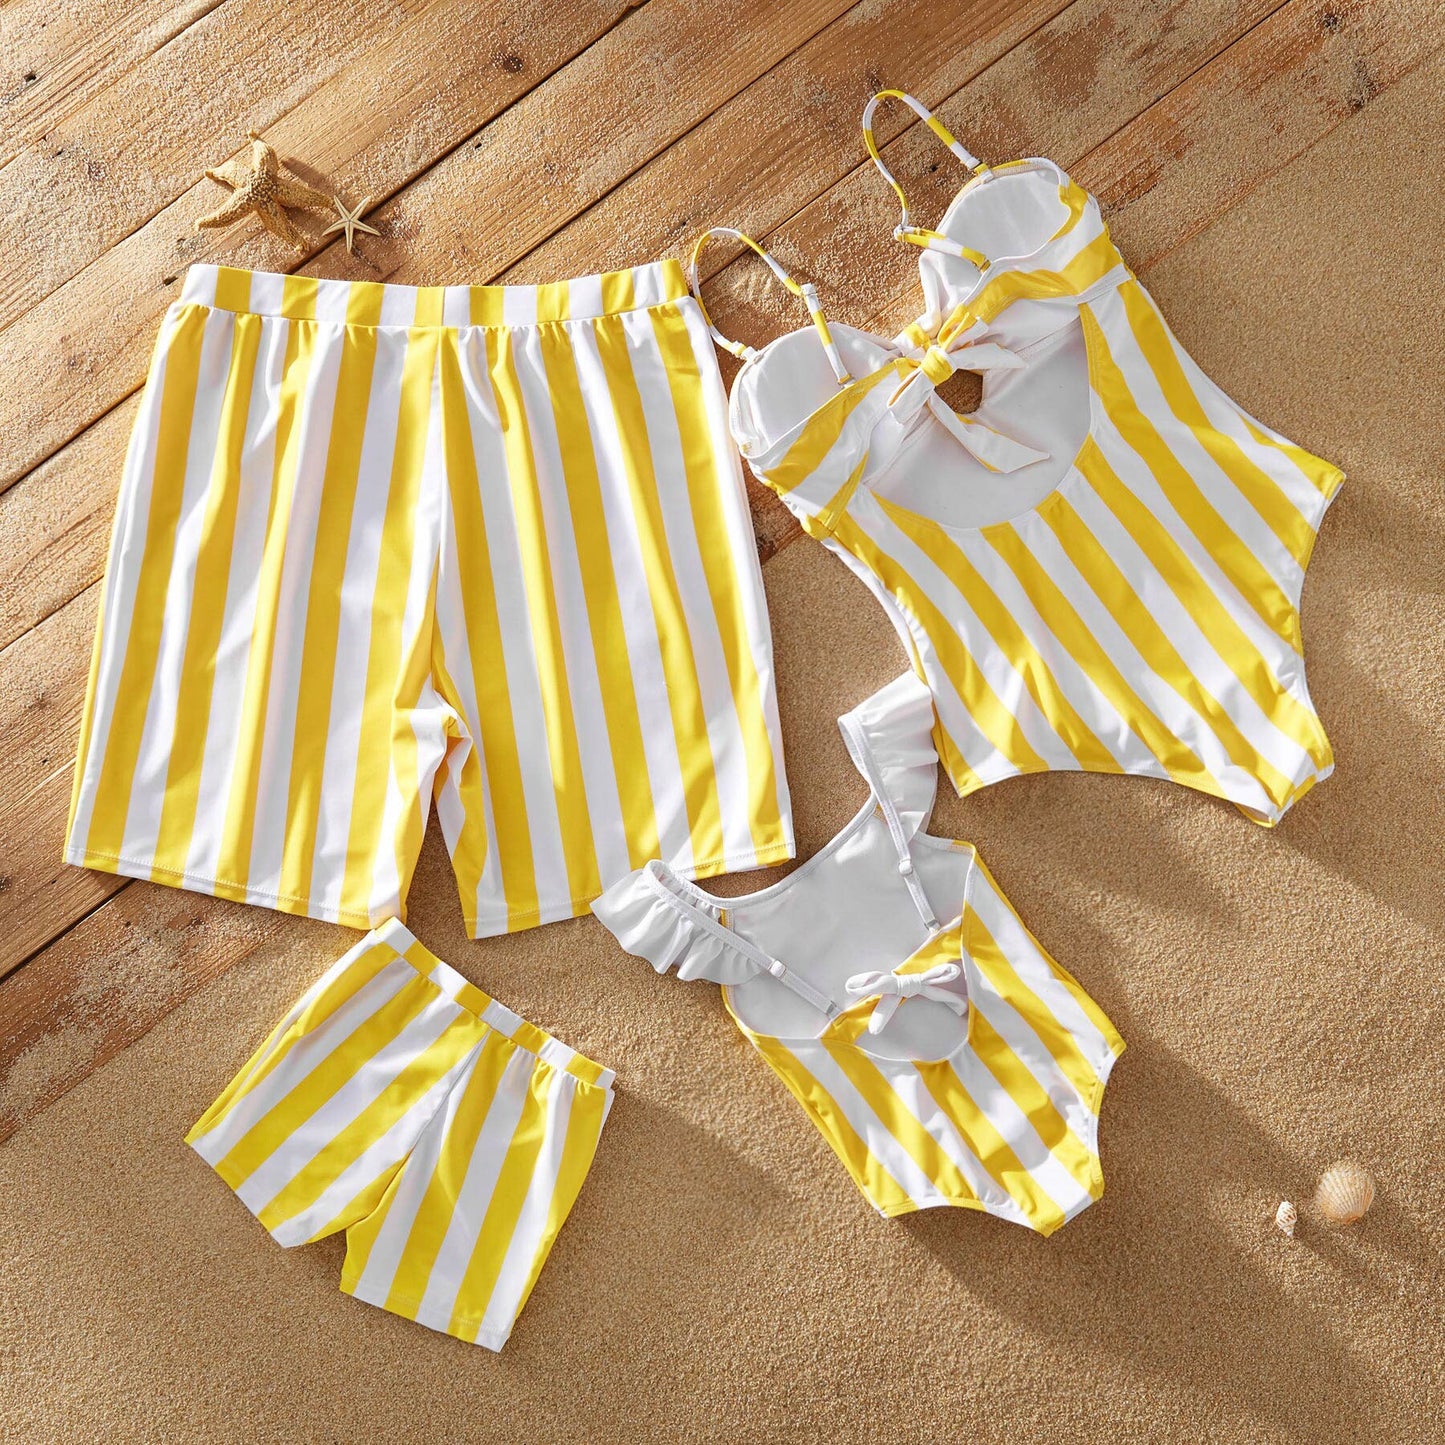 Mommy & Me! Matching Yellow Striped One Piece Swimsuits